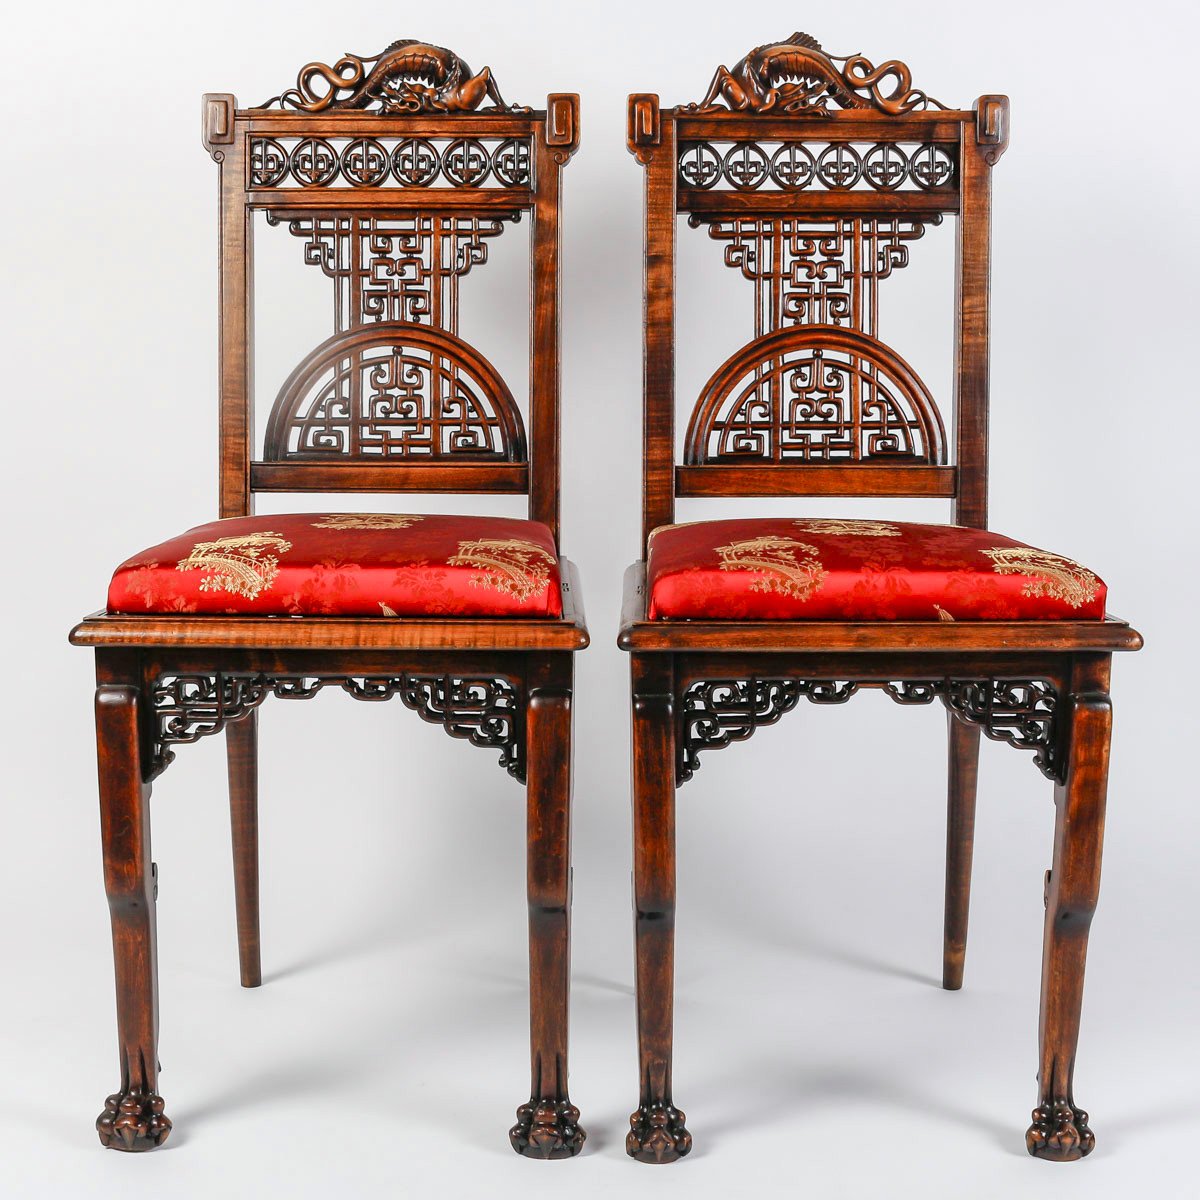 A Pair Of De Chairs Attributed To Viardot.